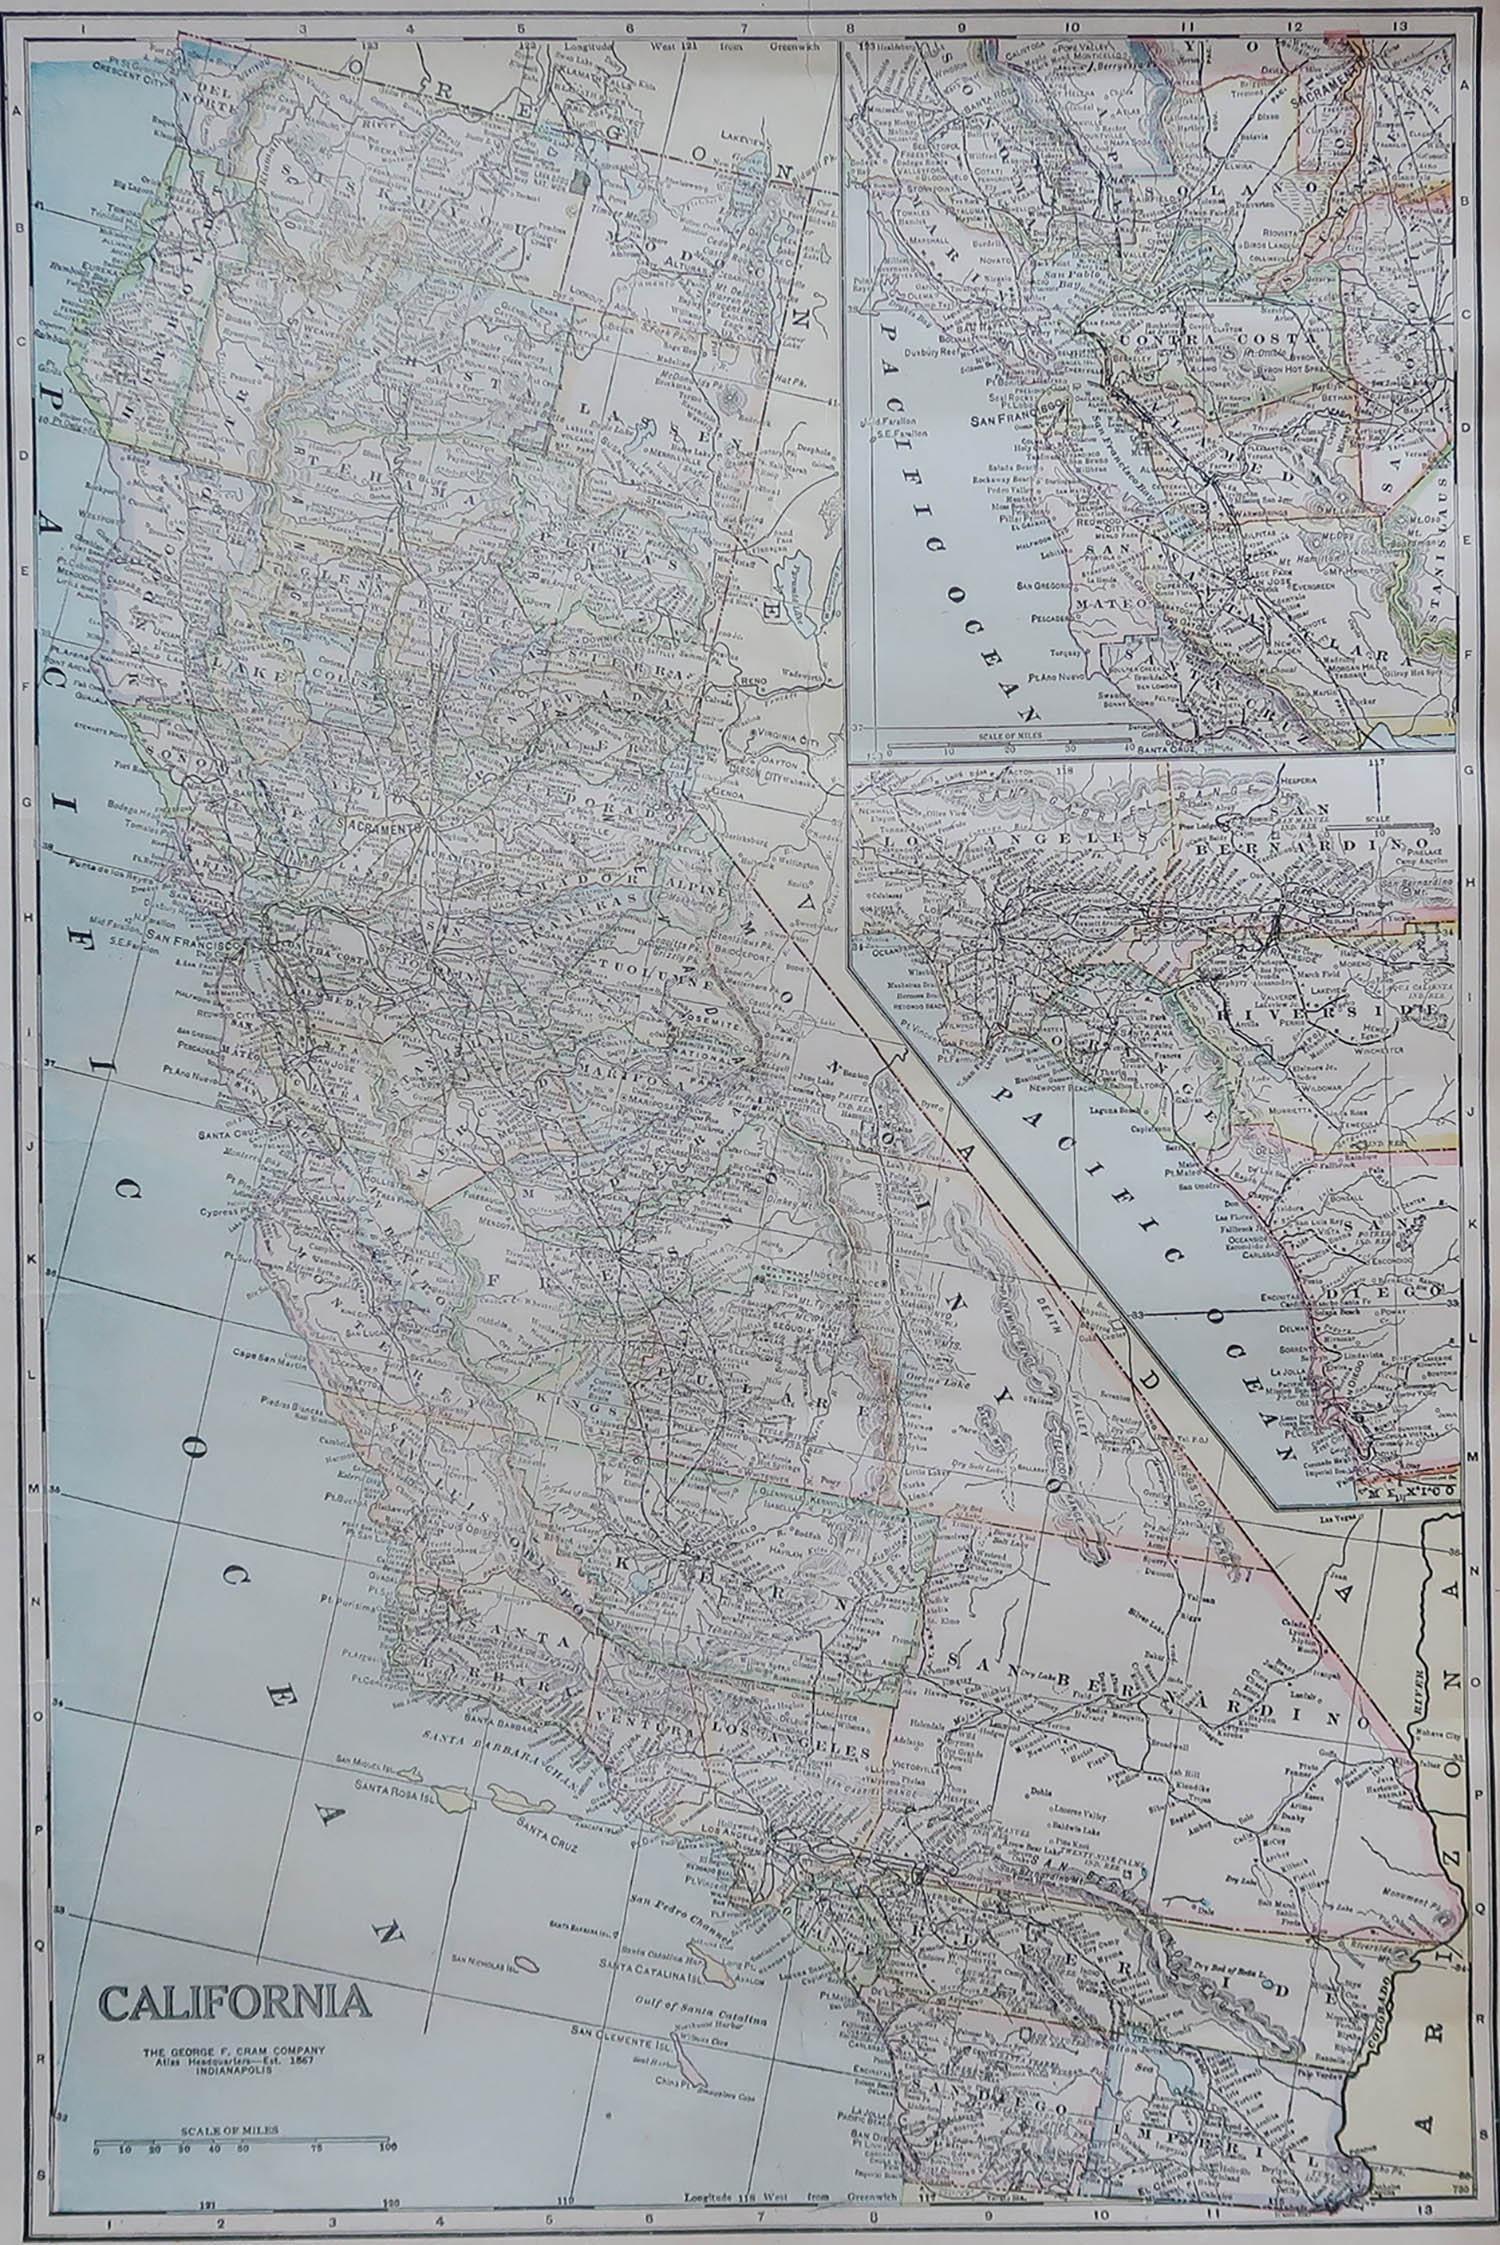 Fabulous map of California

Original color

Engraved and printed by the George F. Cram Company, Indianapolis.

Published, circa 1900

Unframed

Free shipping.